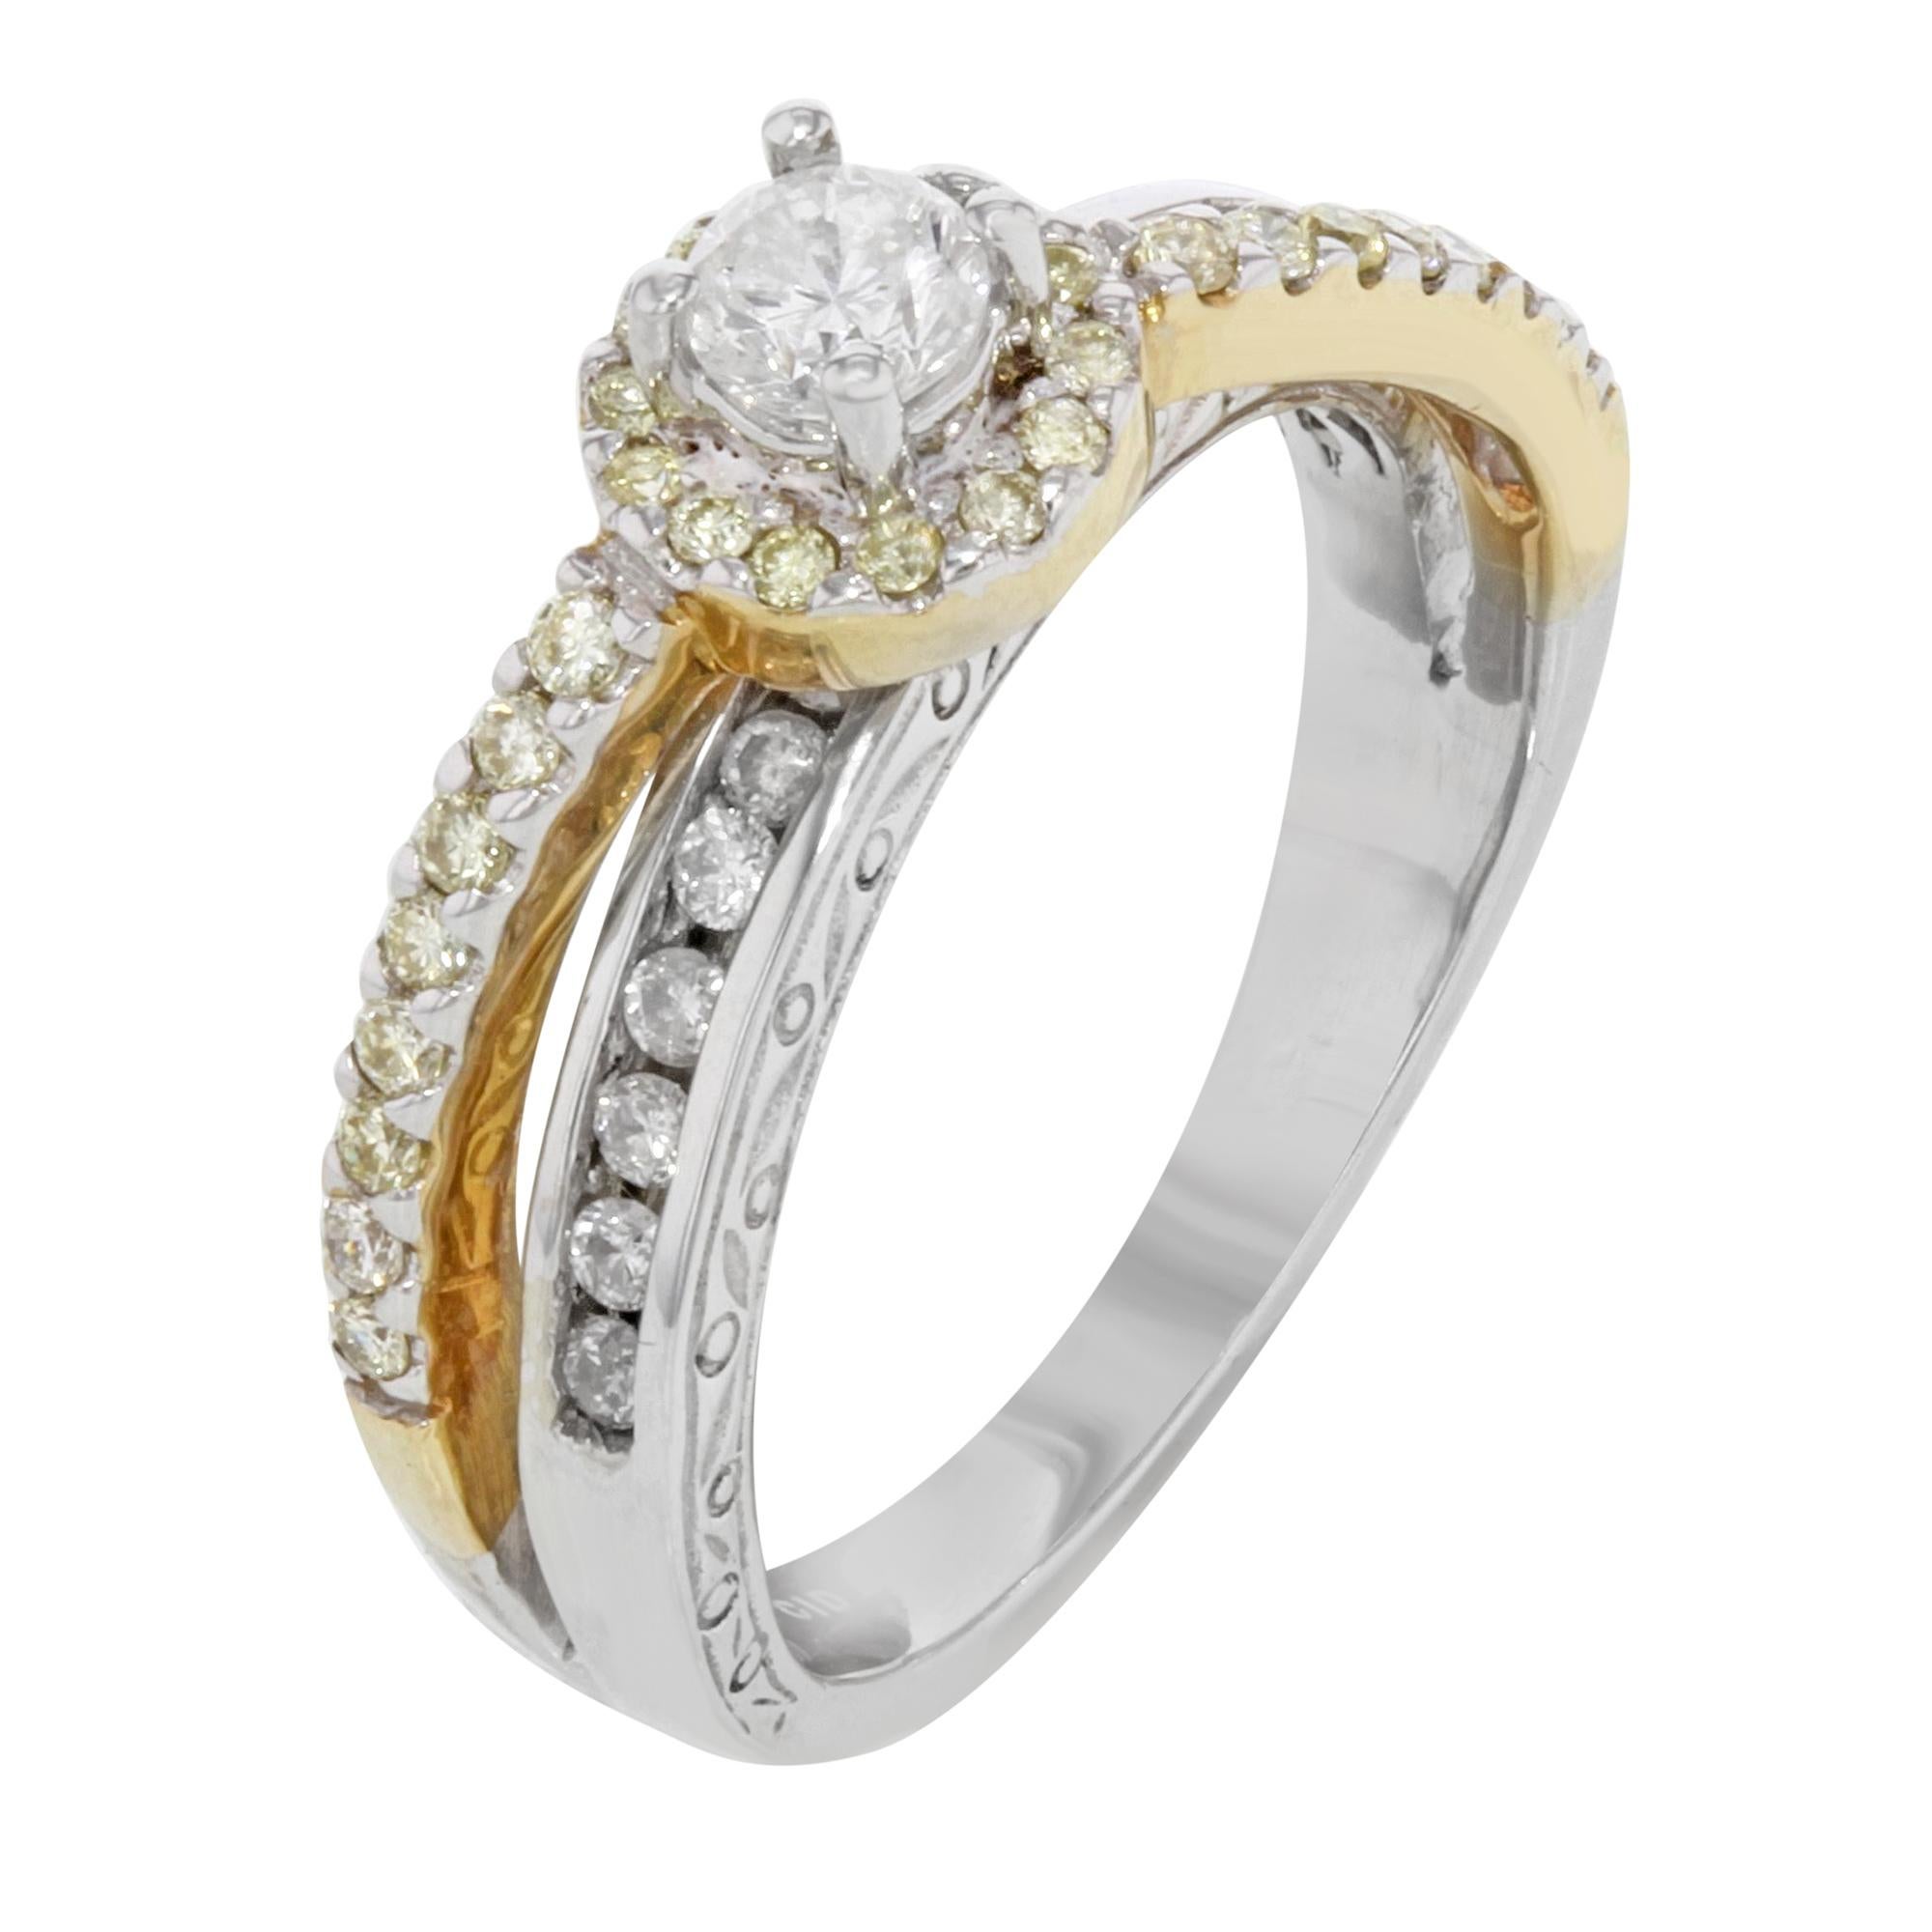 This beautiful ring is crafted in 14k white and yellow gold. Featuring a center round cut diamond accented with a line of round cut white diamonds in channel setting on white gold and a row of yellow diamonds in pave setting on yellow gold. Total